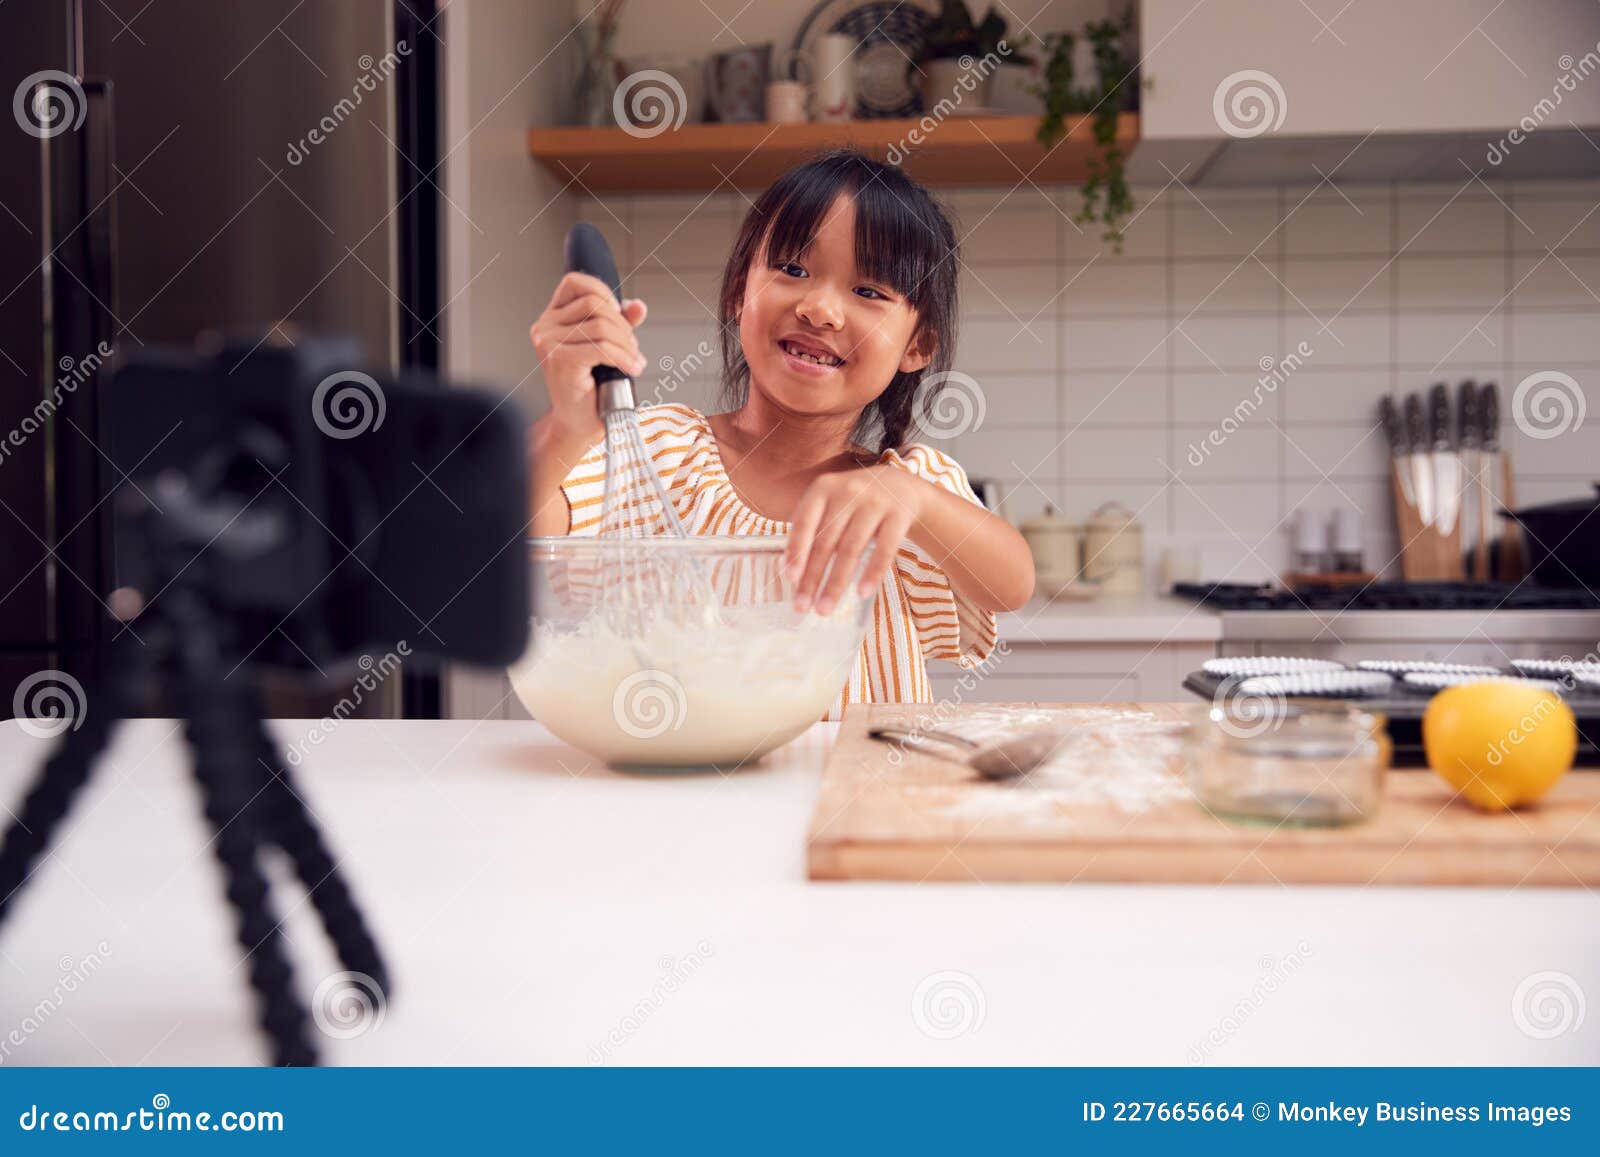 asian girl baking cupcakes in kitchen at home whilst on vlogging on mobile phone